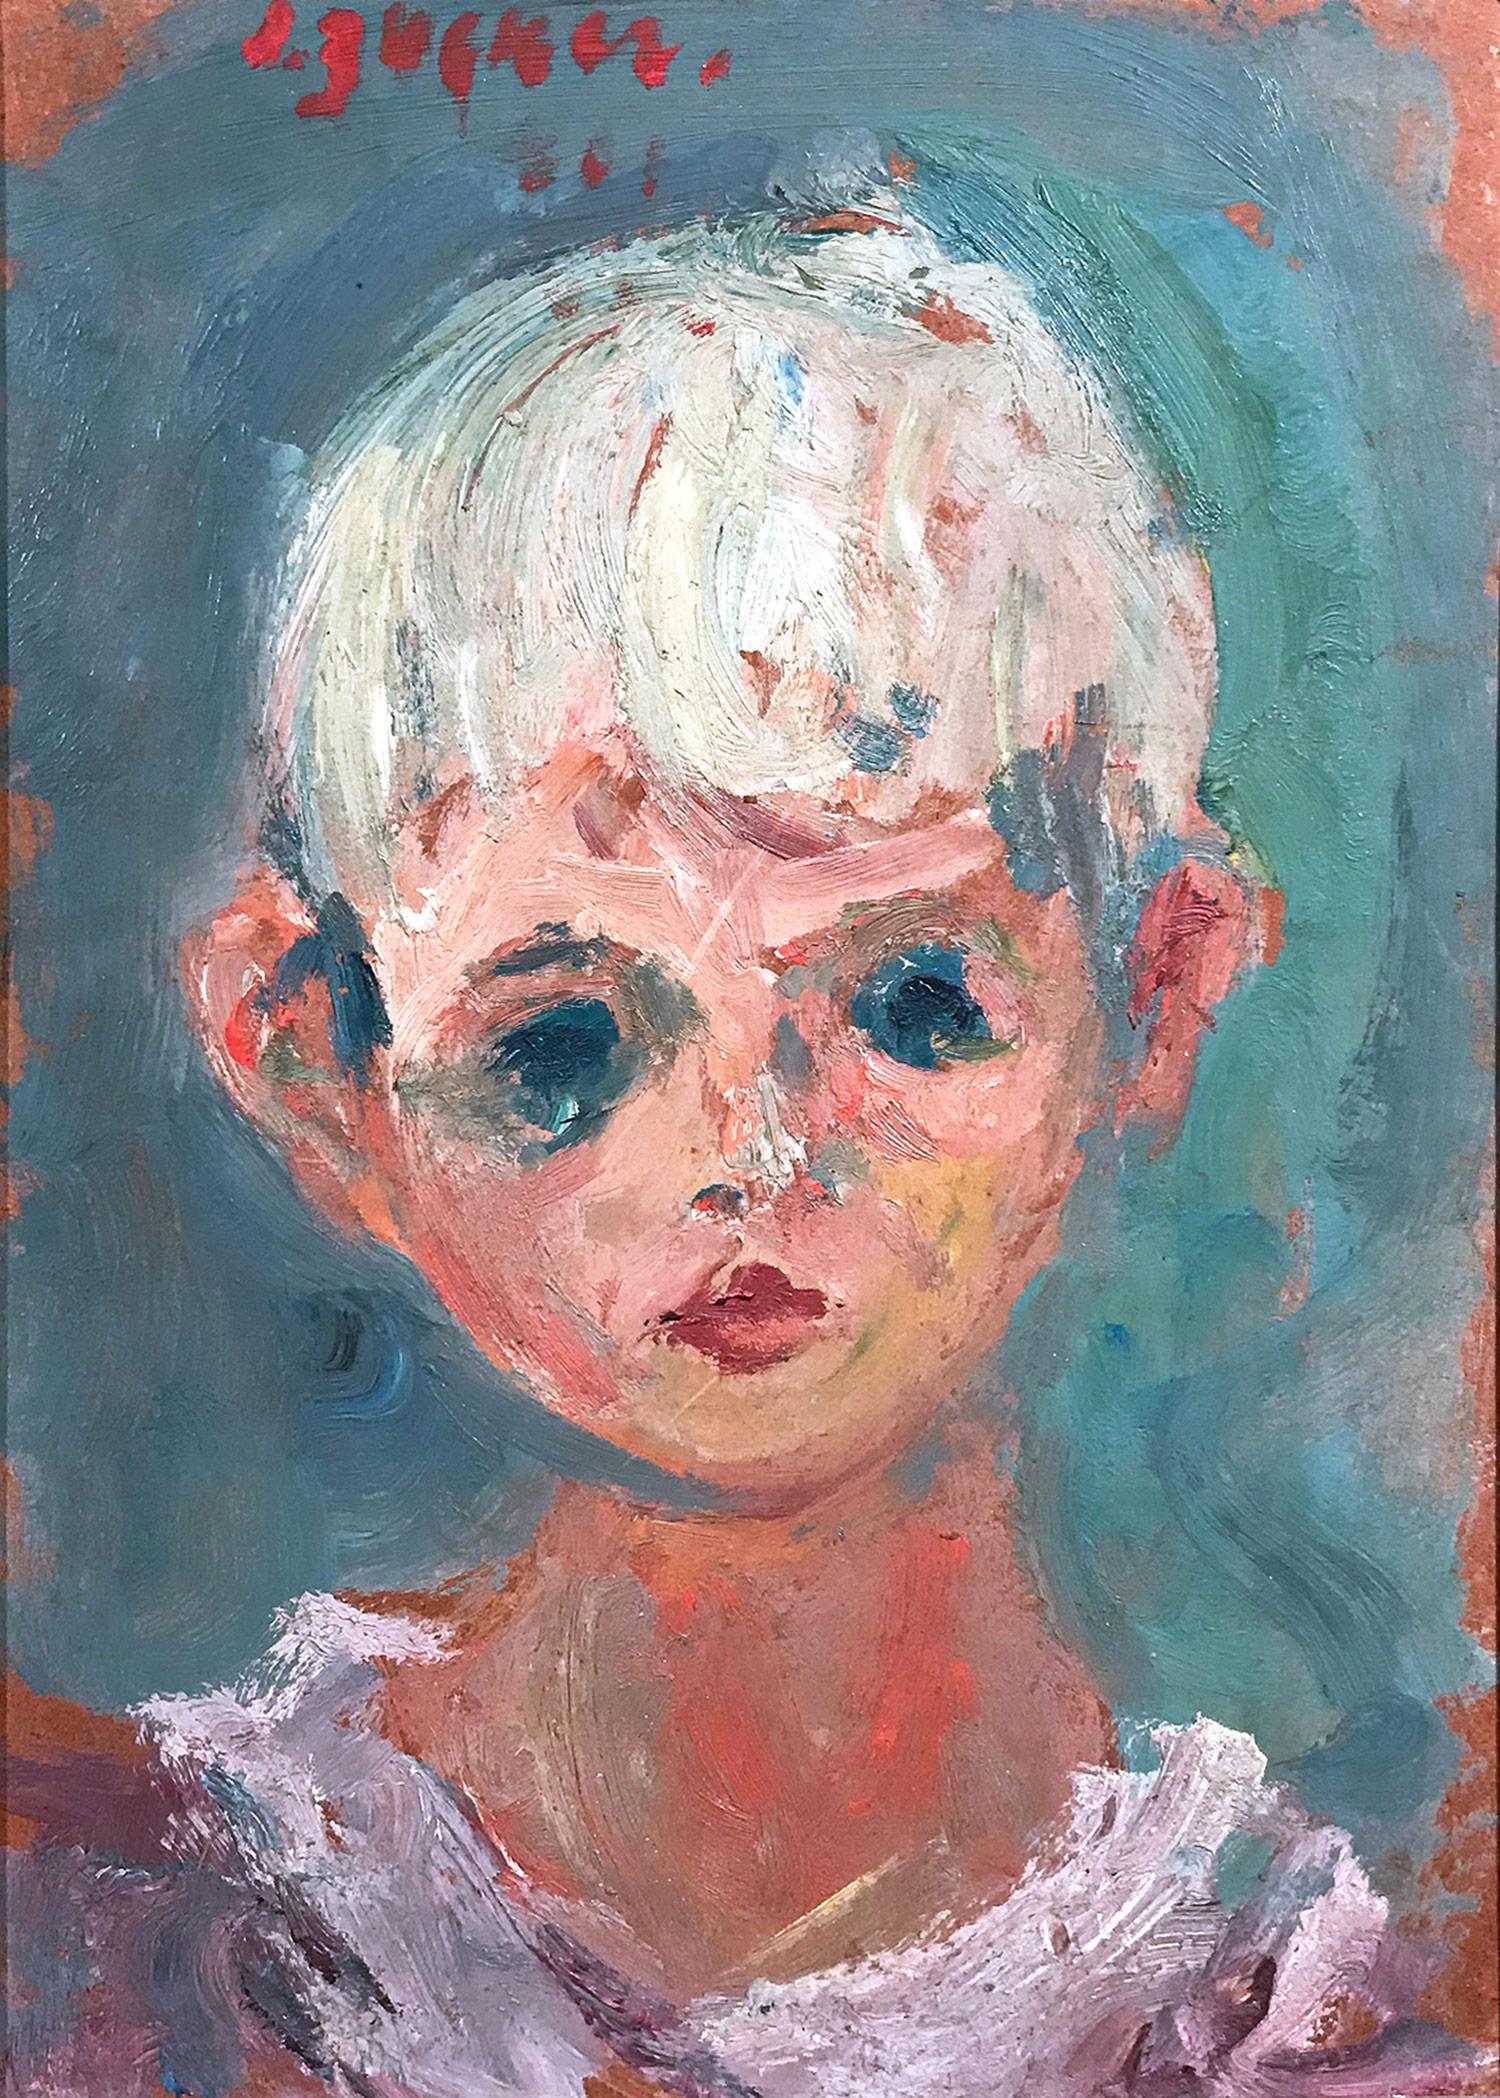 Portrait of a Young Girl, Impressionistic Oil Painting - Brown Portrait Painting by Jacques Zucker